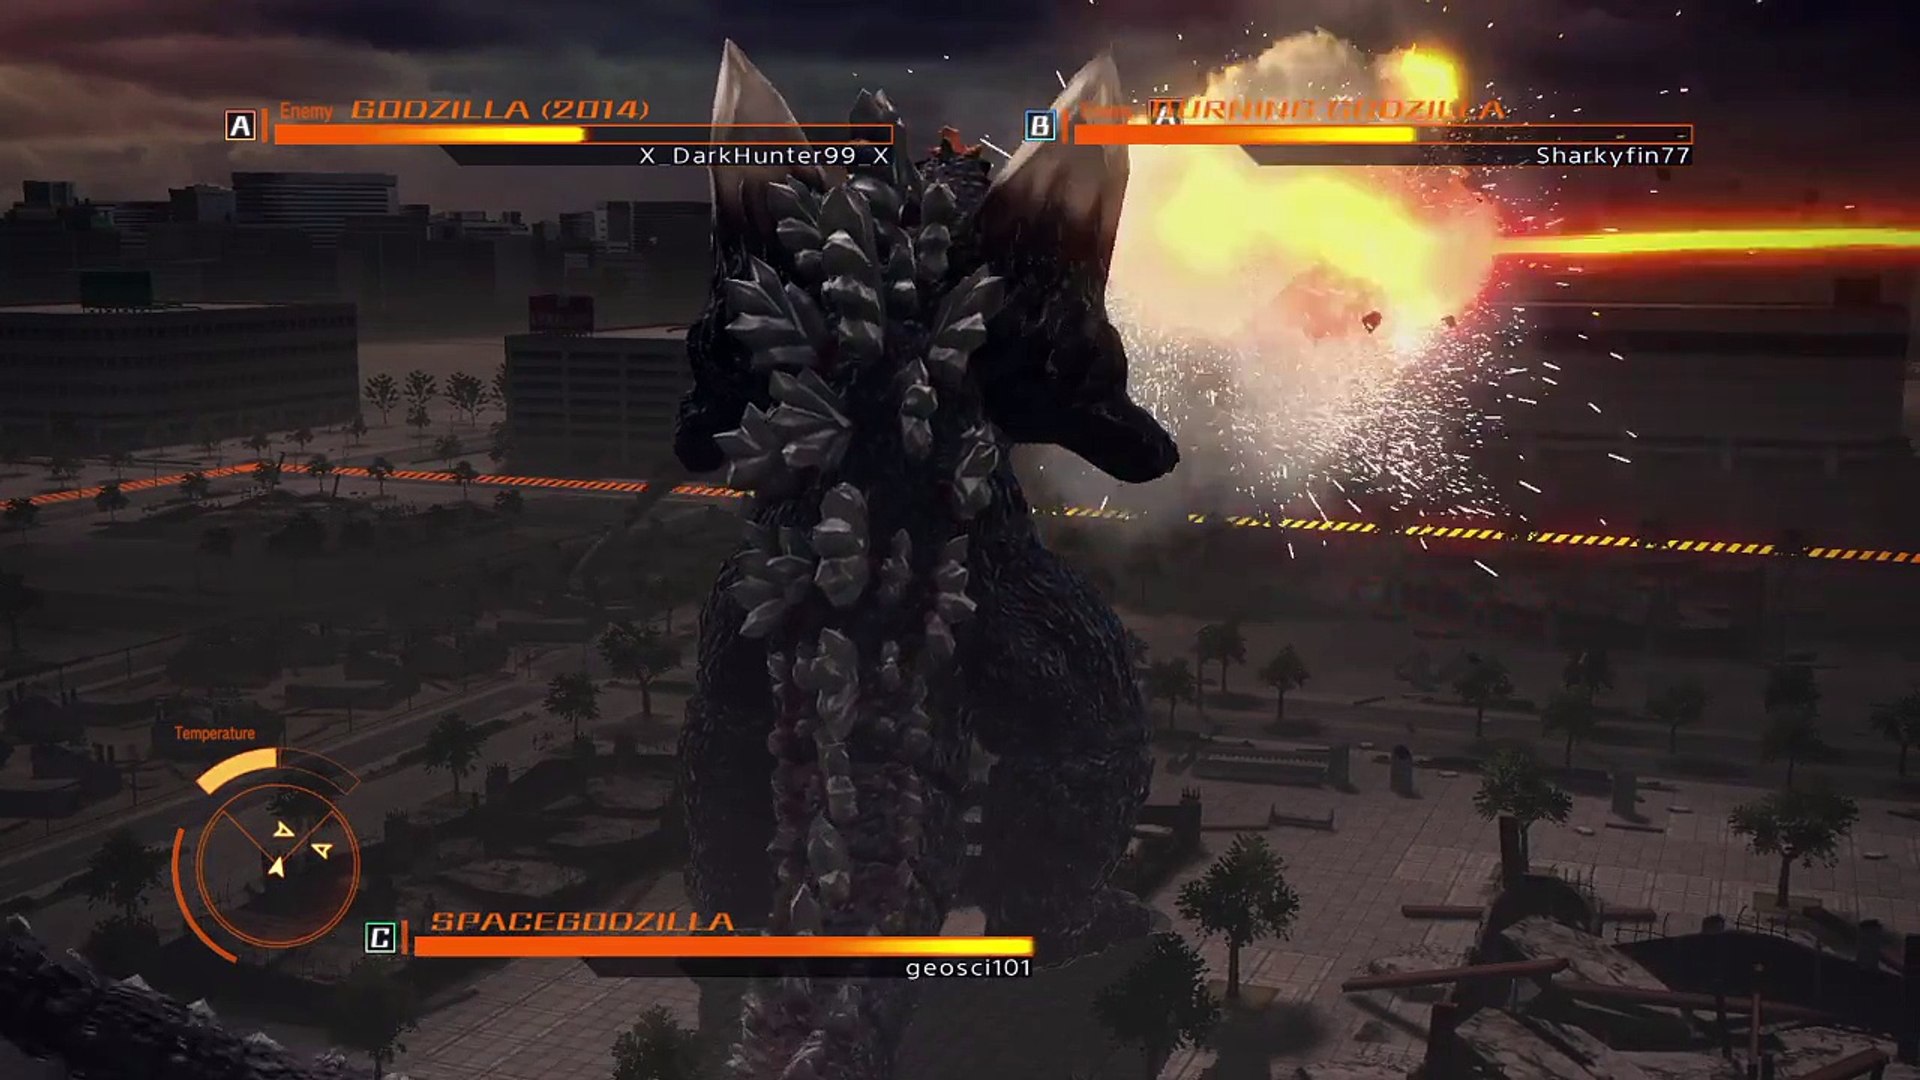 download game godzilla ps4 for pc